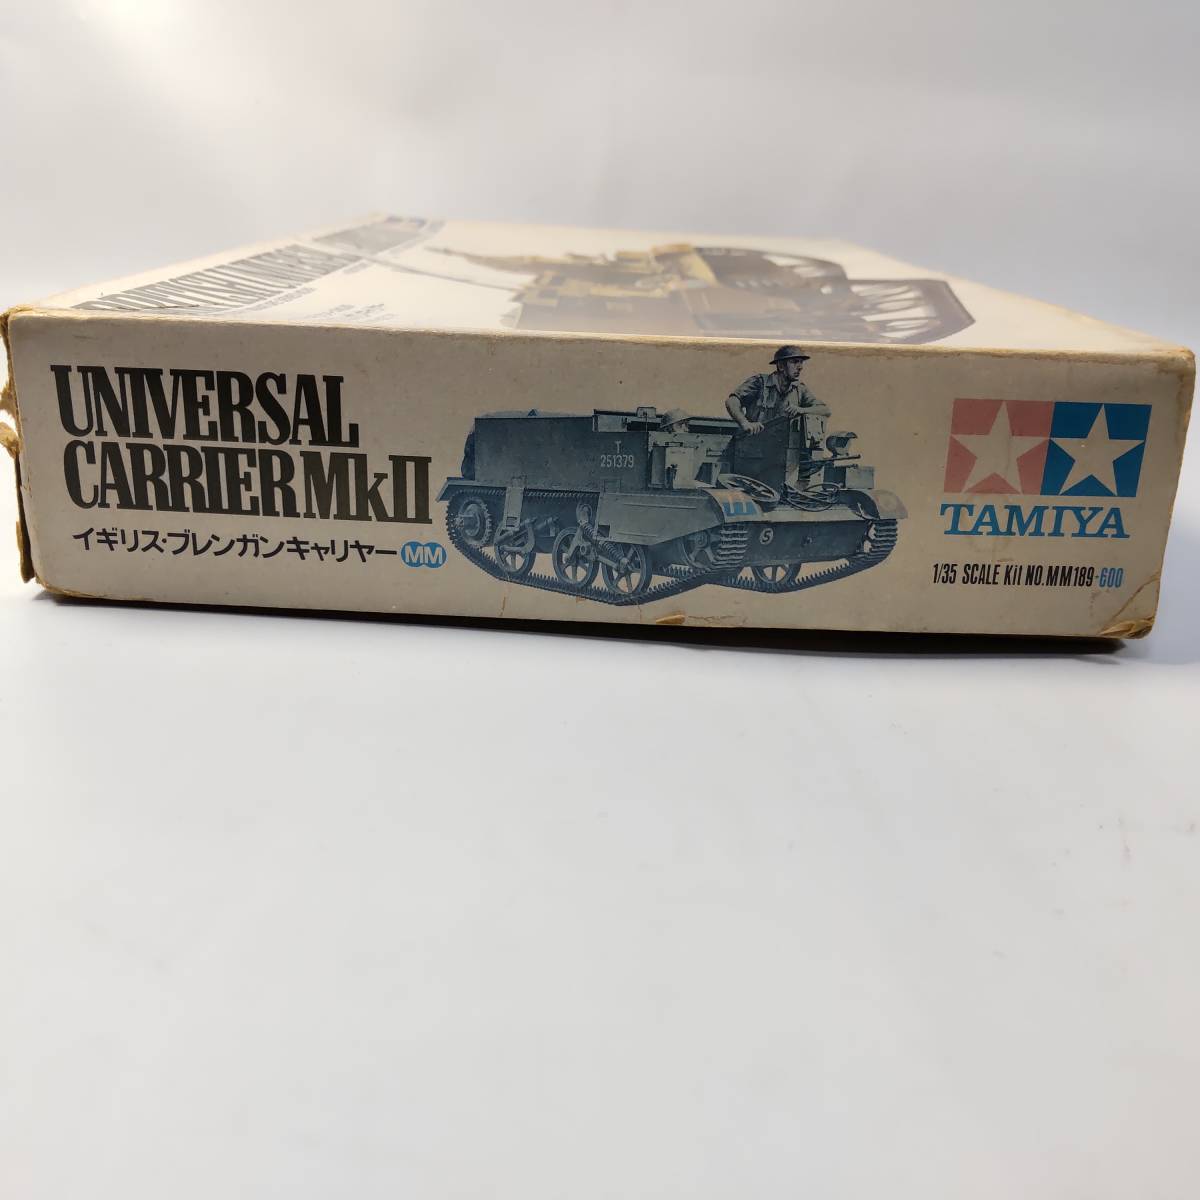 1/35b brick n* carrier England army figure 2 body attaching Tamiya model small deer Tamiya breaking the seal settled used not yet constructed plastic model rare out of print 